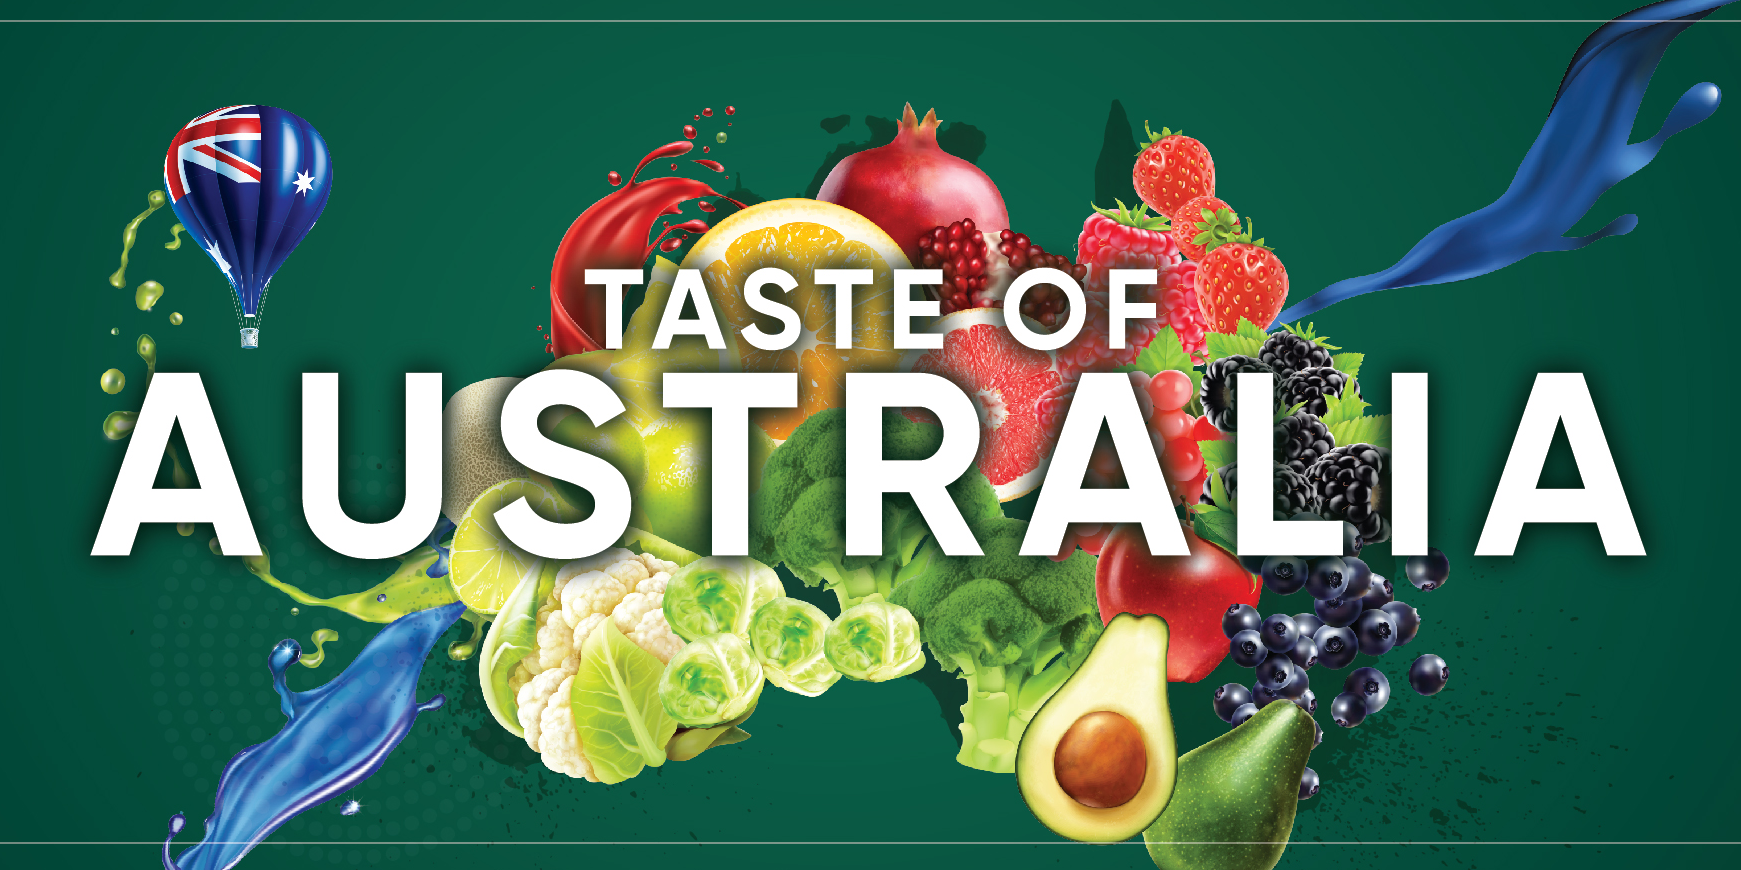 Get a Taste of Australia at Cold Storage and CS Fresh!